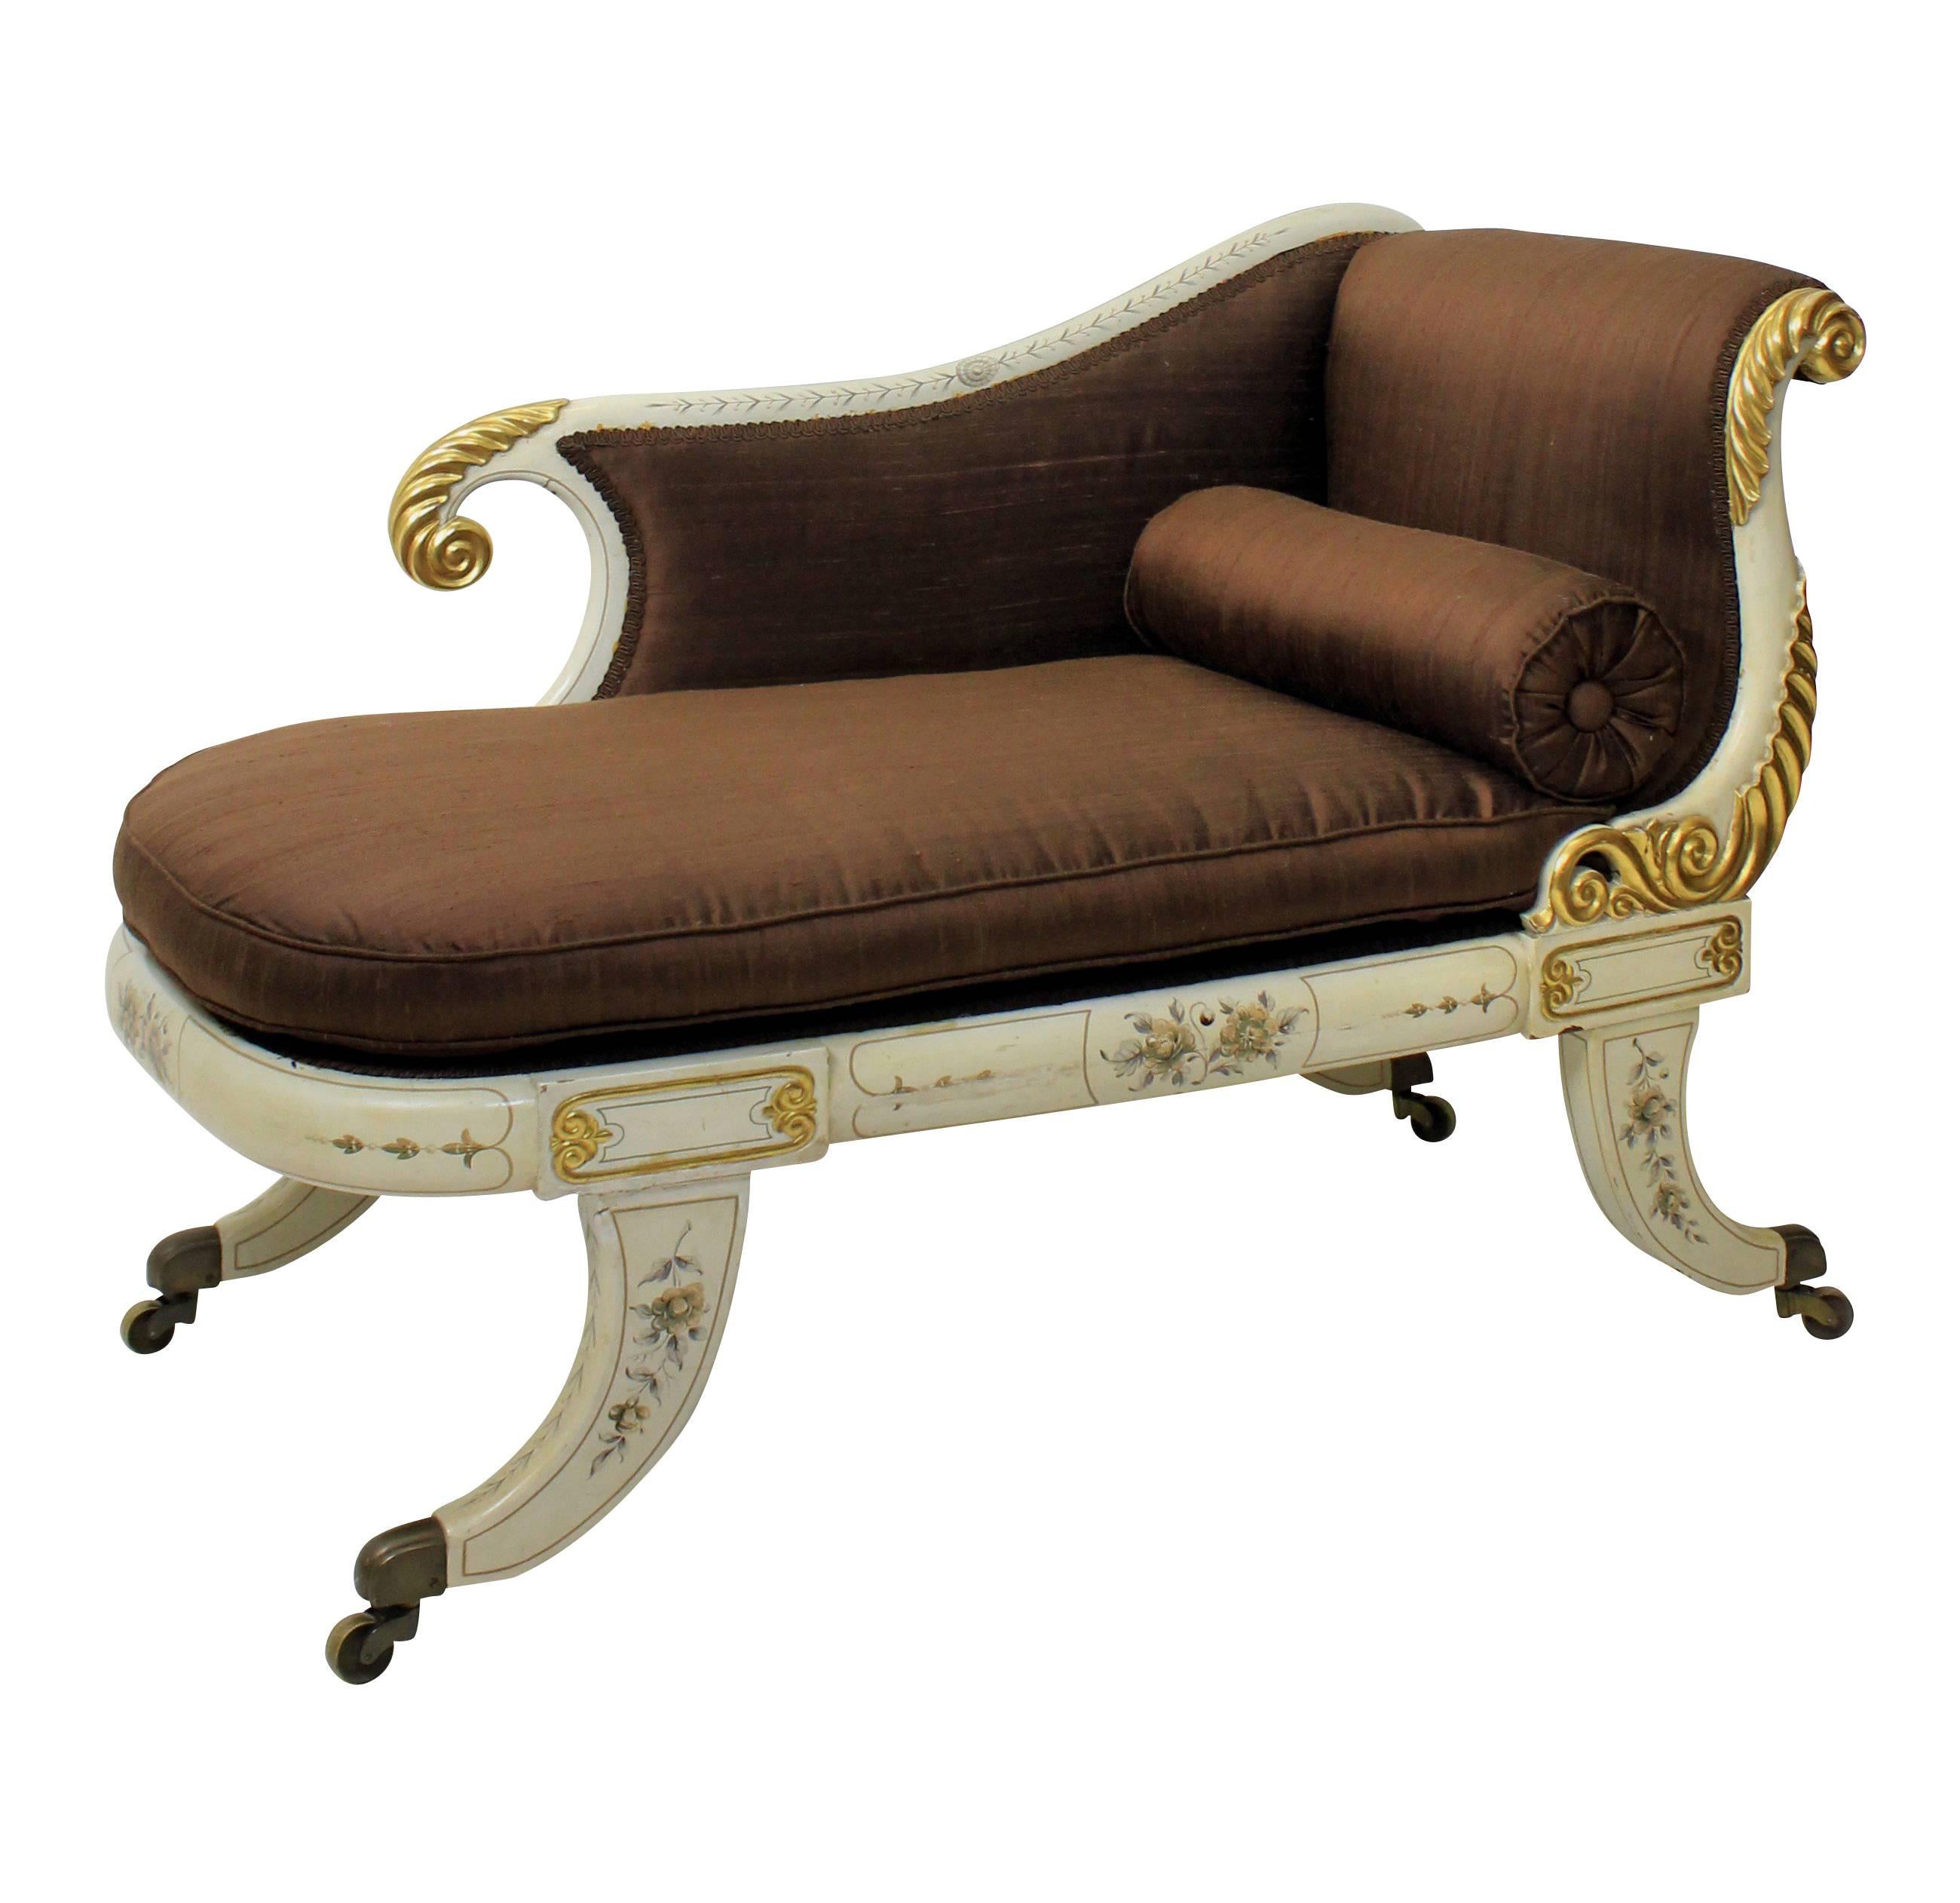 A Russian painted, water gilded  & decorated day bed, newly upholstered in brown silk.